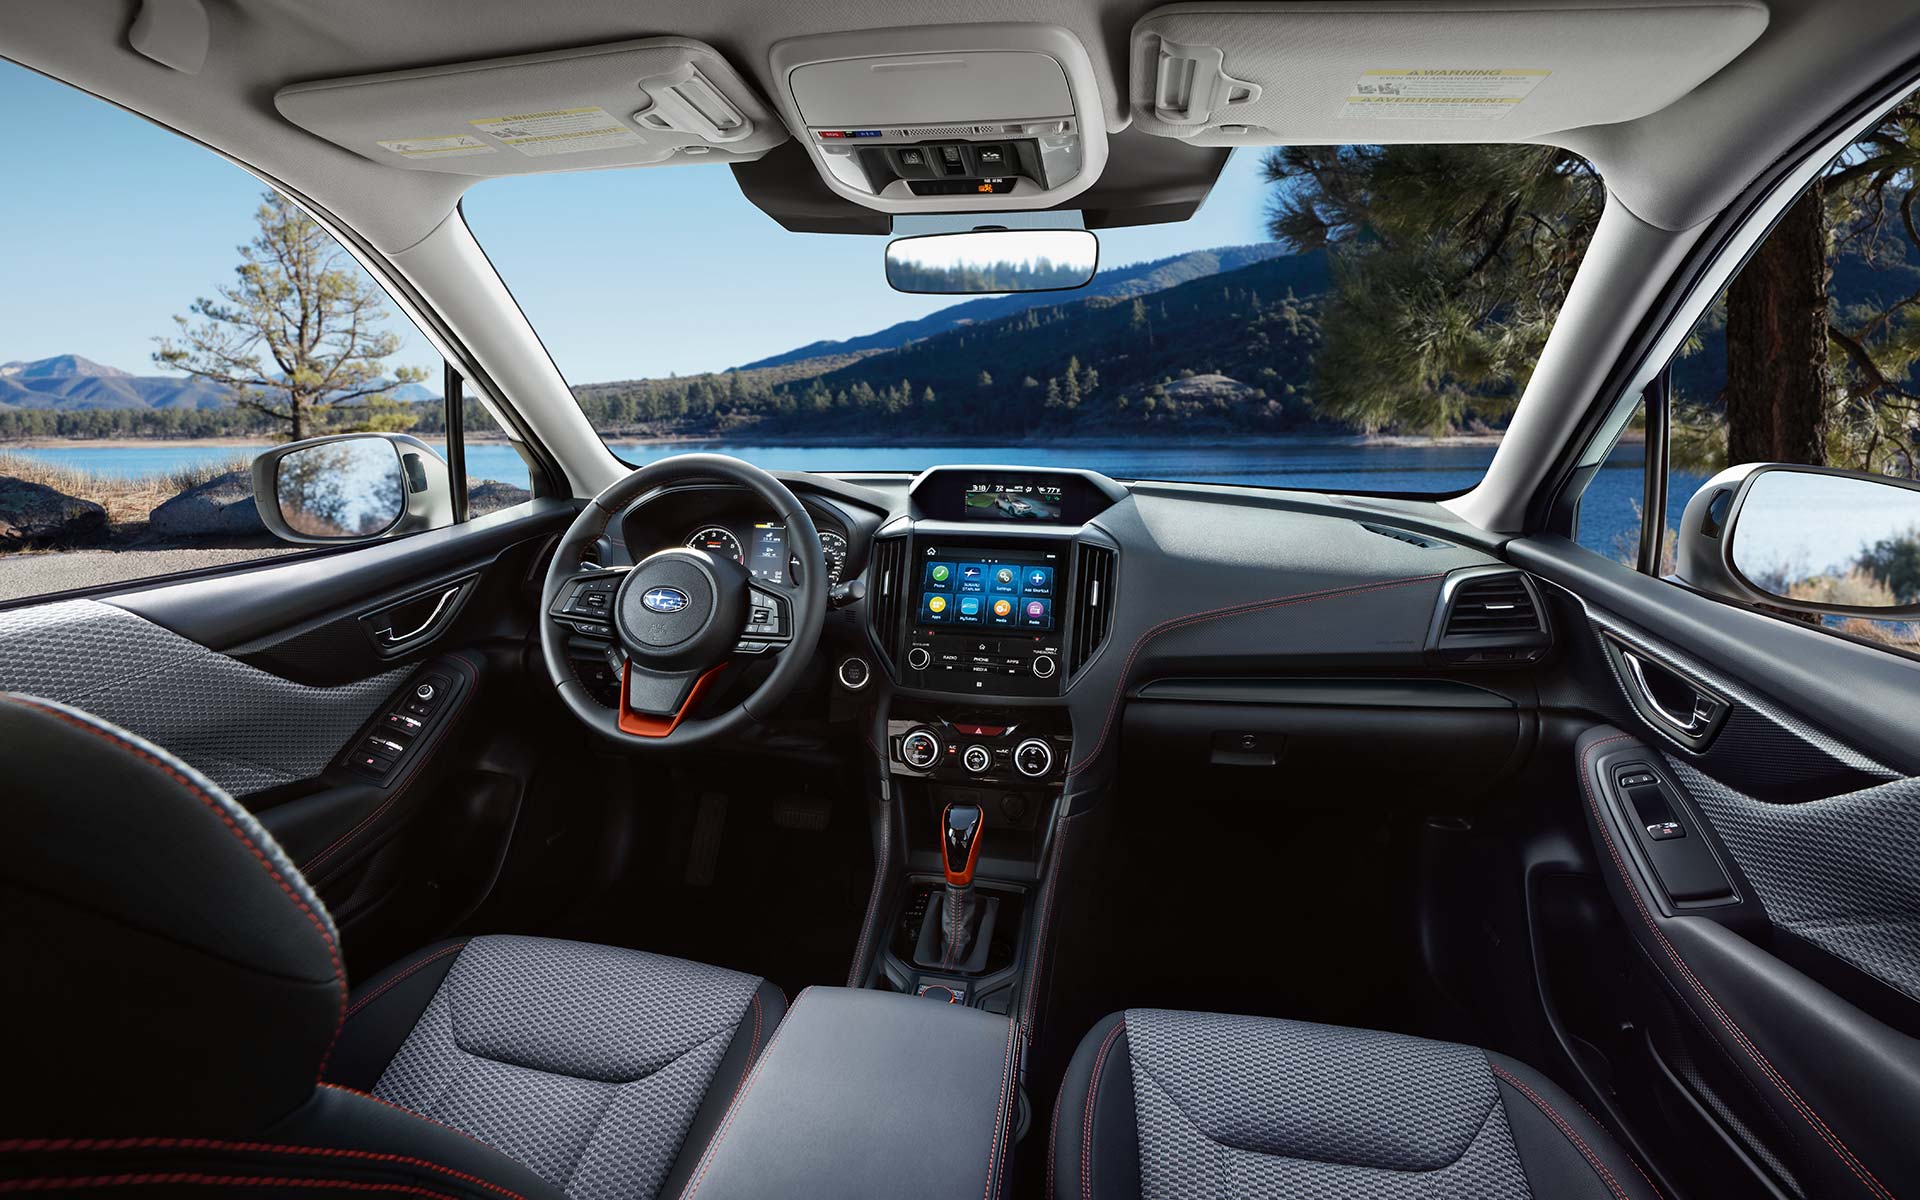 The interior and front dash of the 2022 Forester.